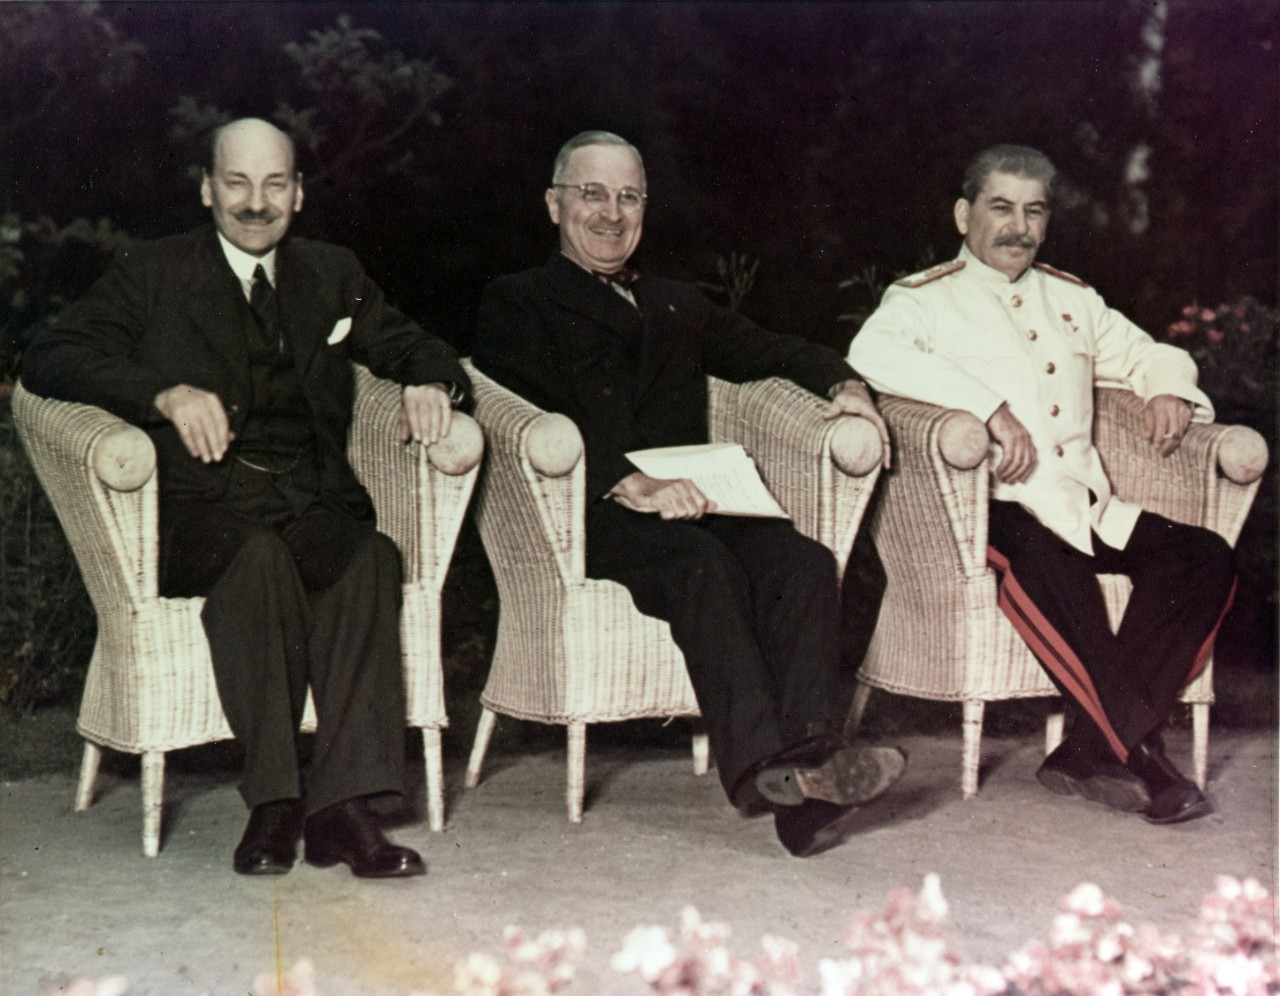 Photo #: USA C-1861 (Color)  Potsdam Conference, July-August 1945